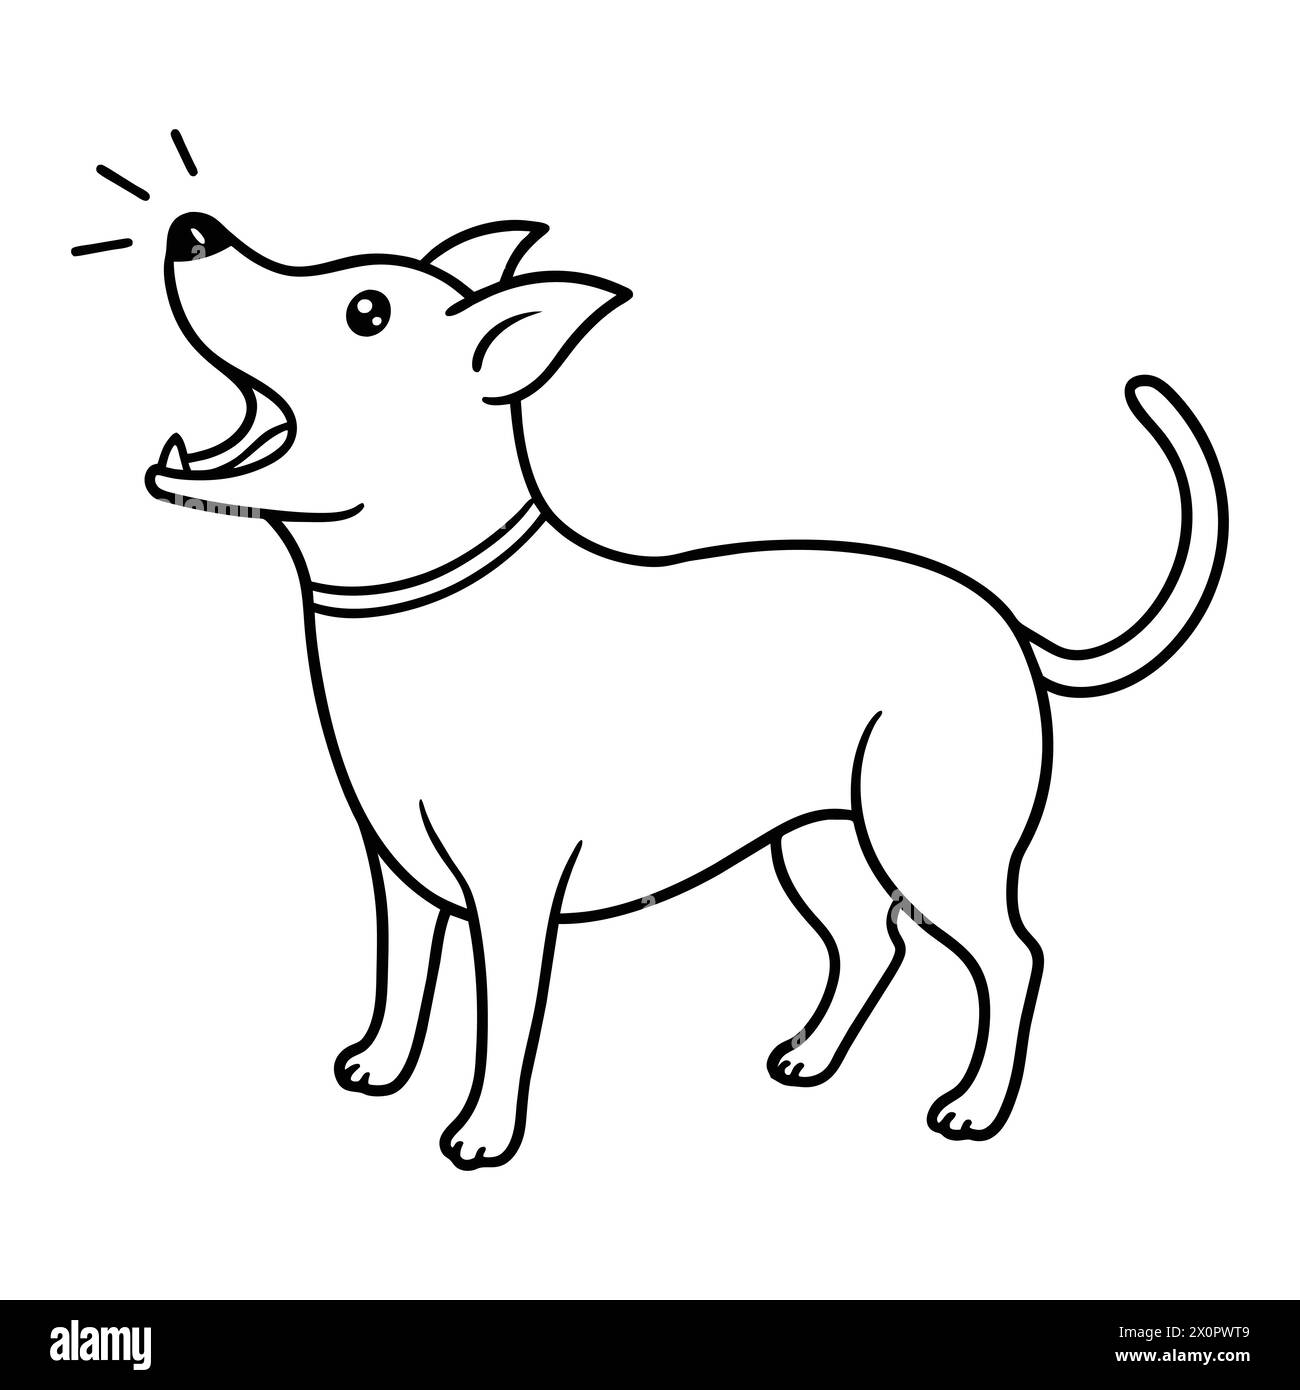 Simple RataThe little dog suddenly started barking loudly,'Adorable Little Dog Alert: Cute Puppy Barking with Vigor - High-Quality Image for Any Pet Stock Vector